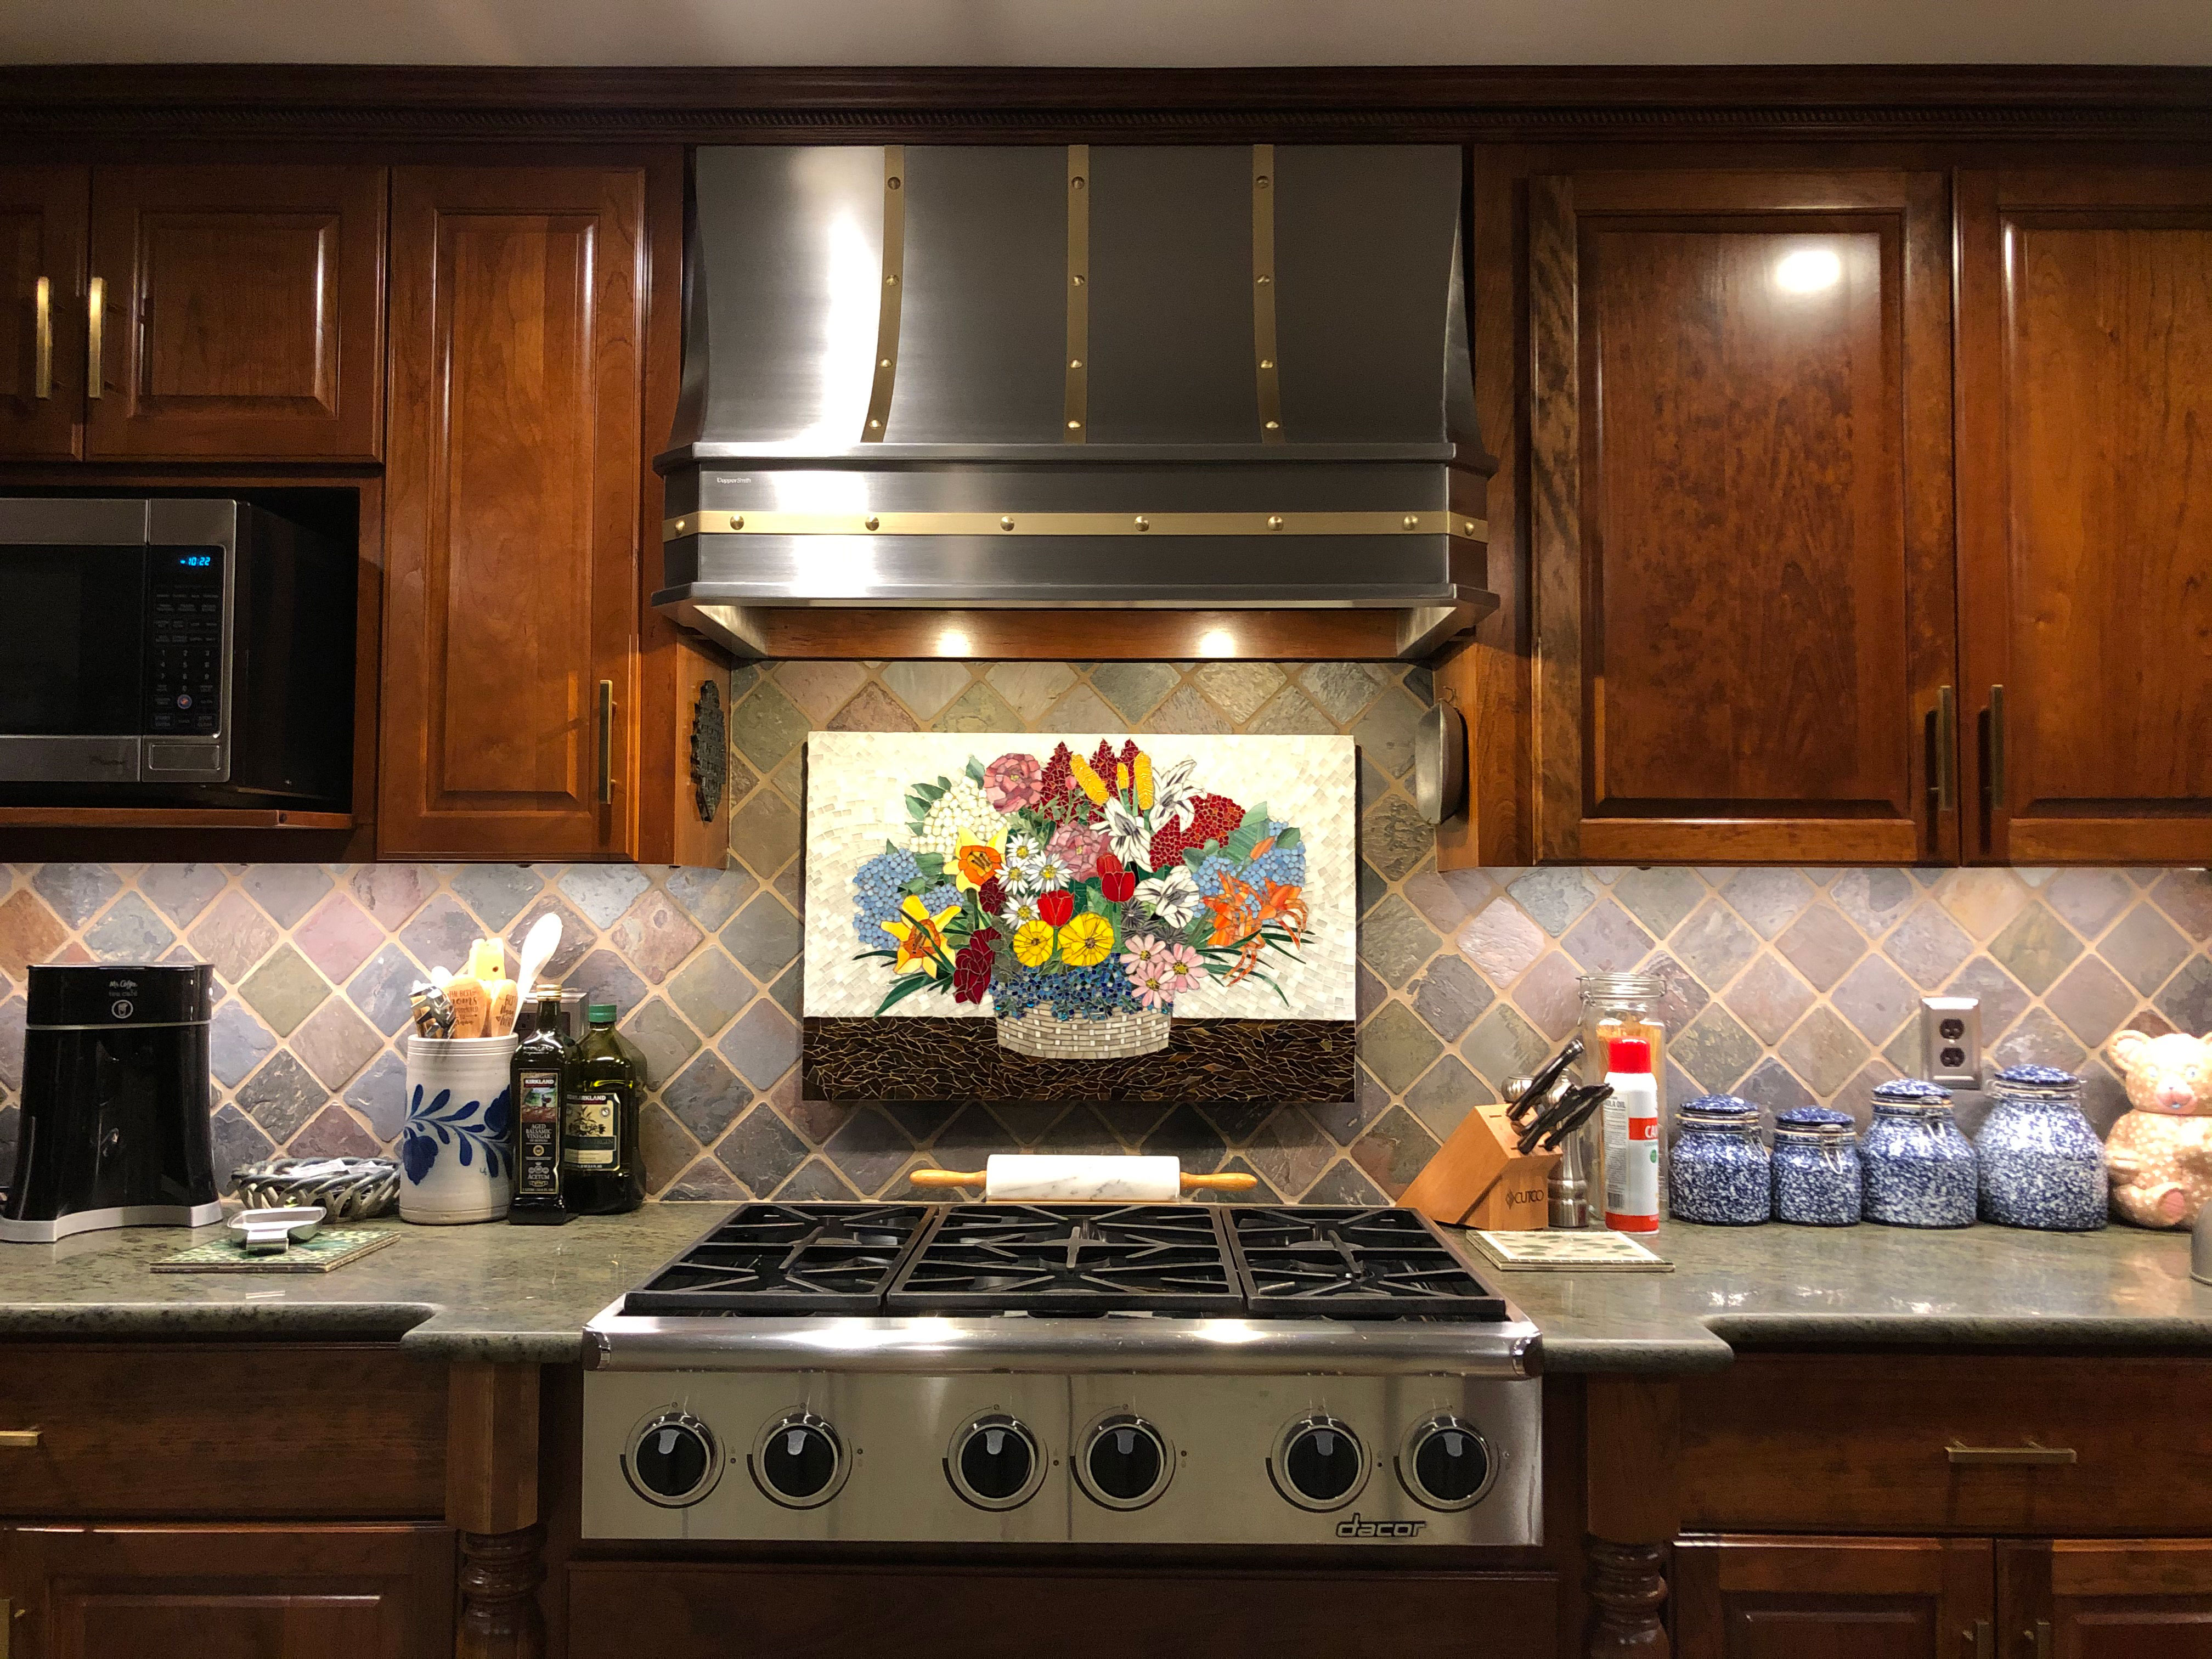 Charming country kitchen designs featuring range hood, kitchen cabinets, marble kitchen countertops, marble backsplash